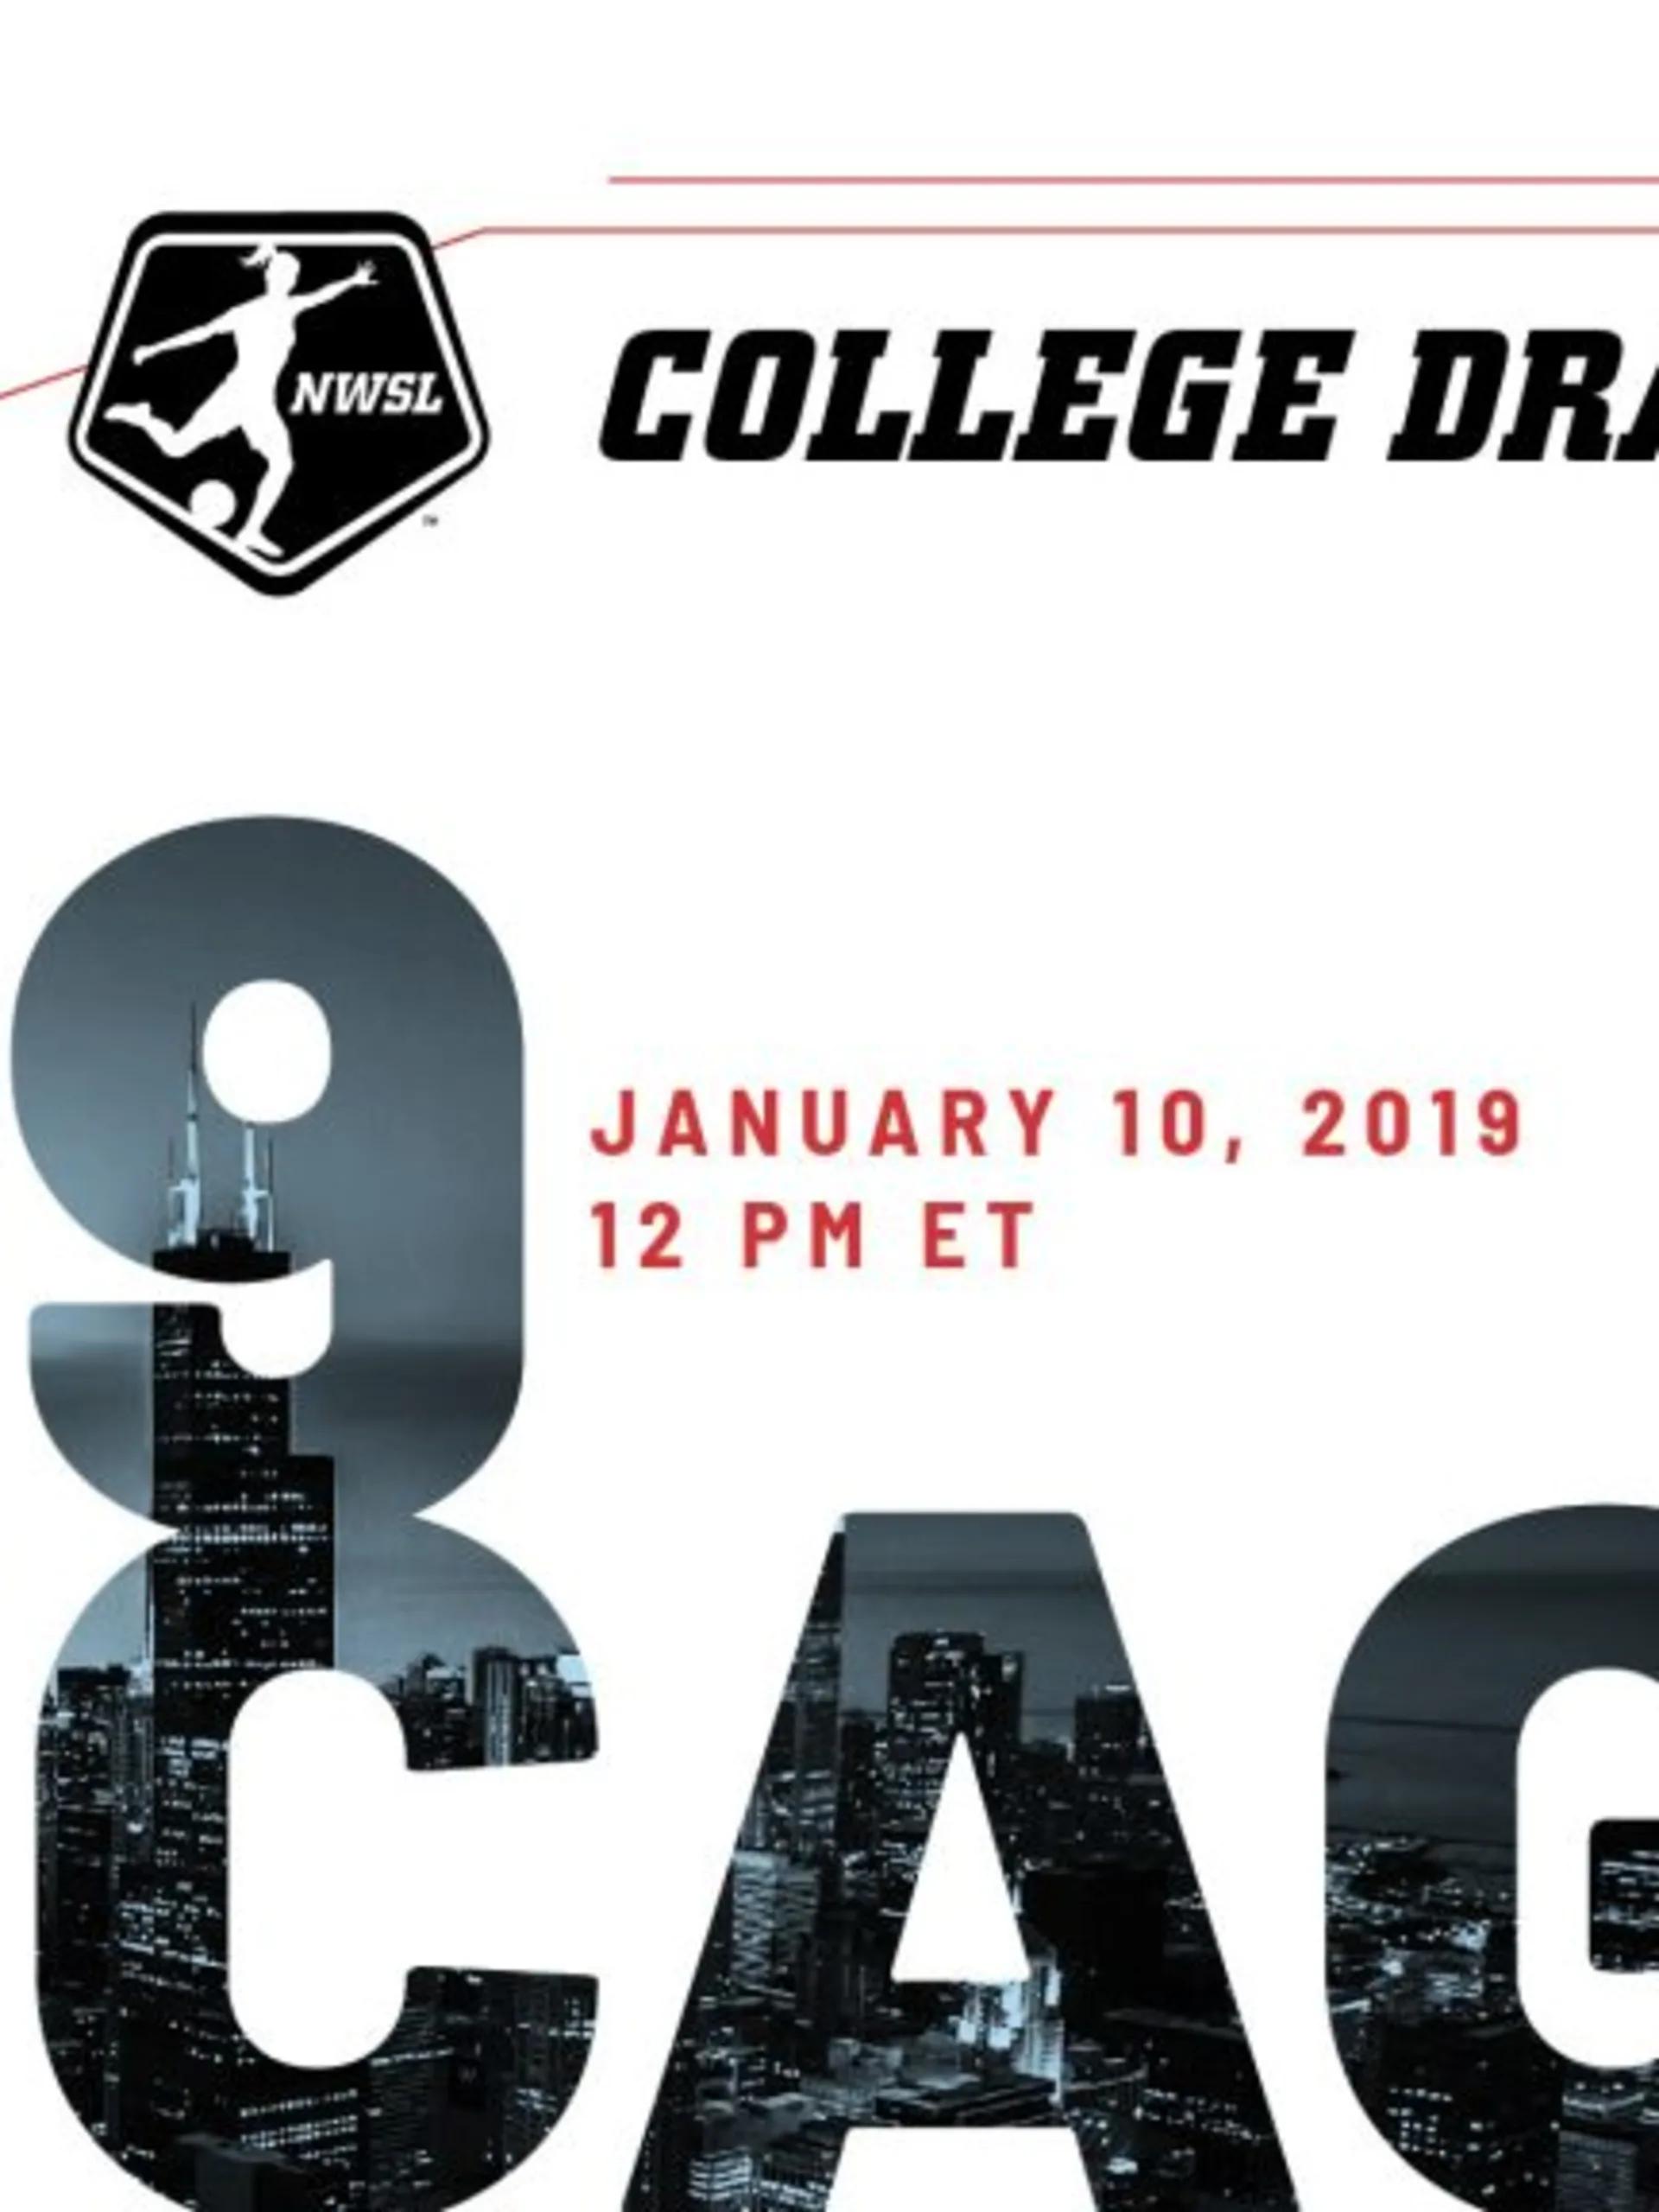 story-image-final-list-of-players-registered-for-the-2019-nwsl-college-draft